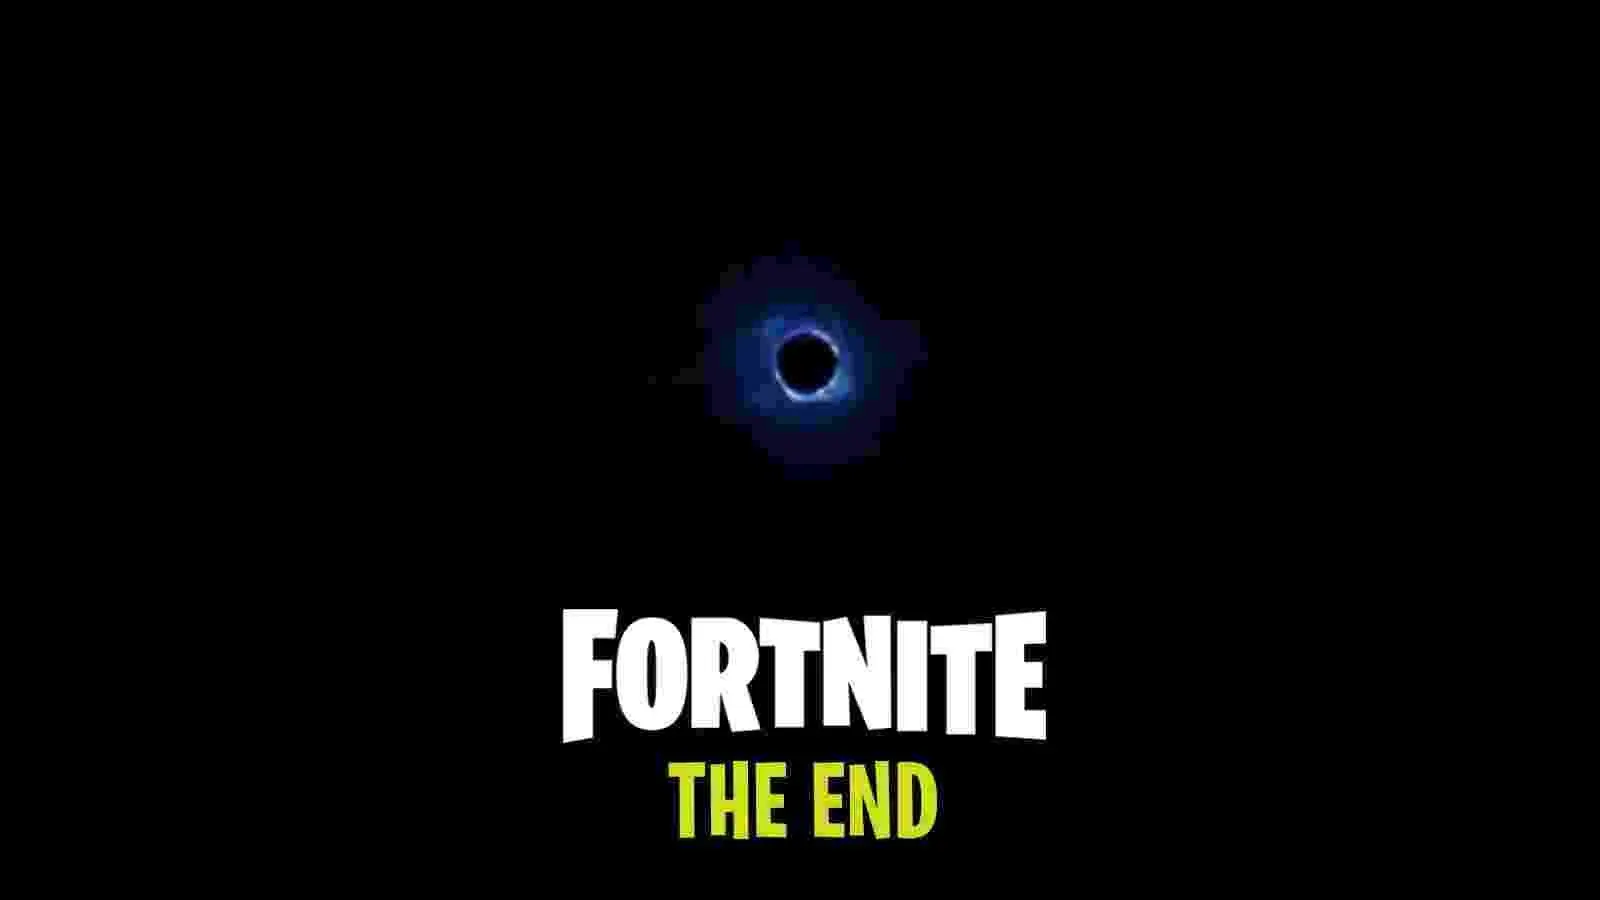 Fortnite, inaccessible for more than 20h